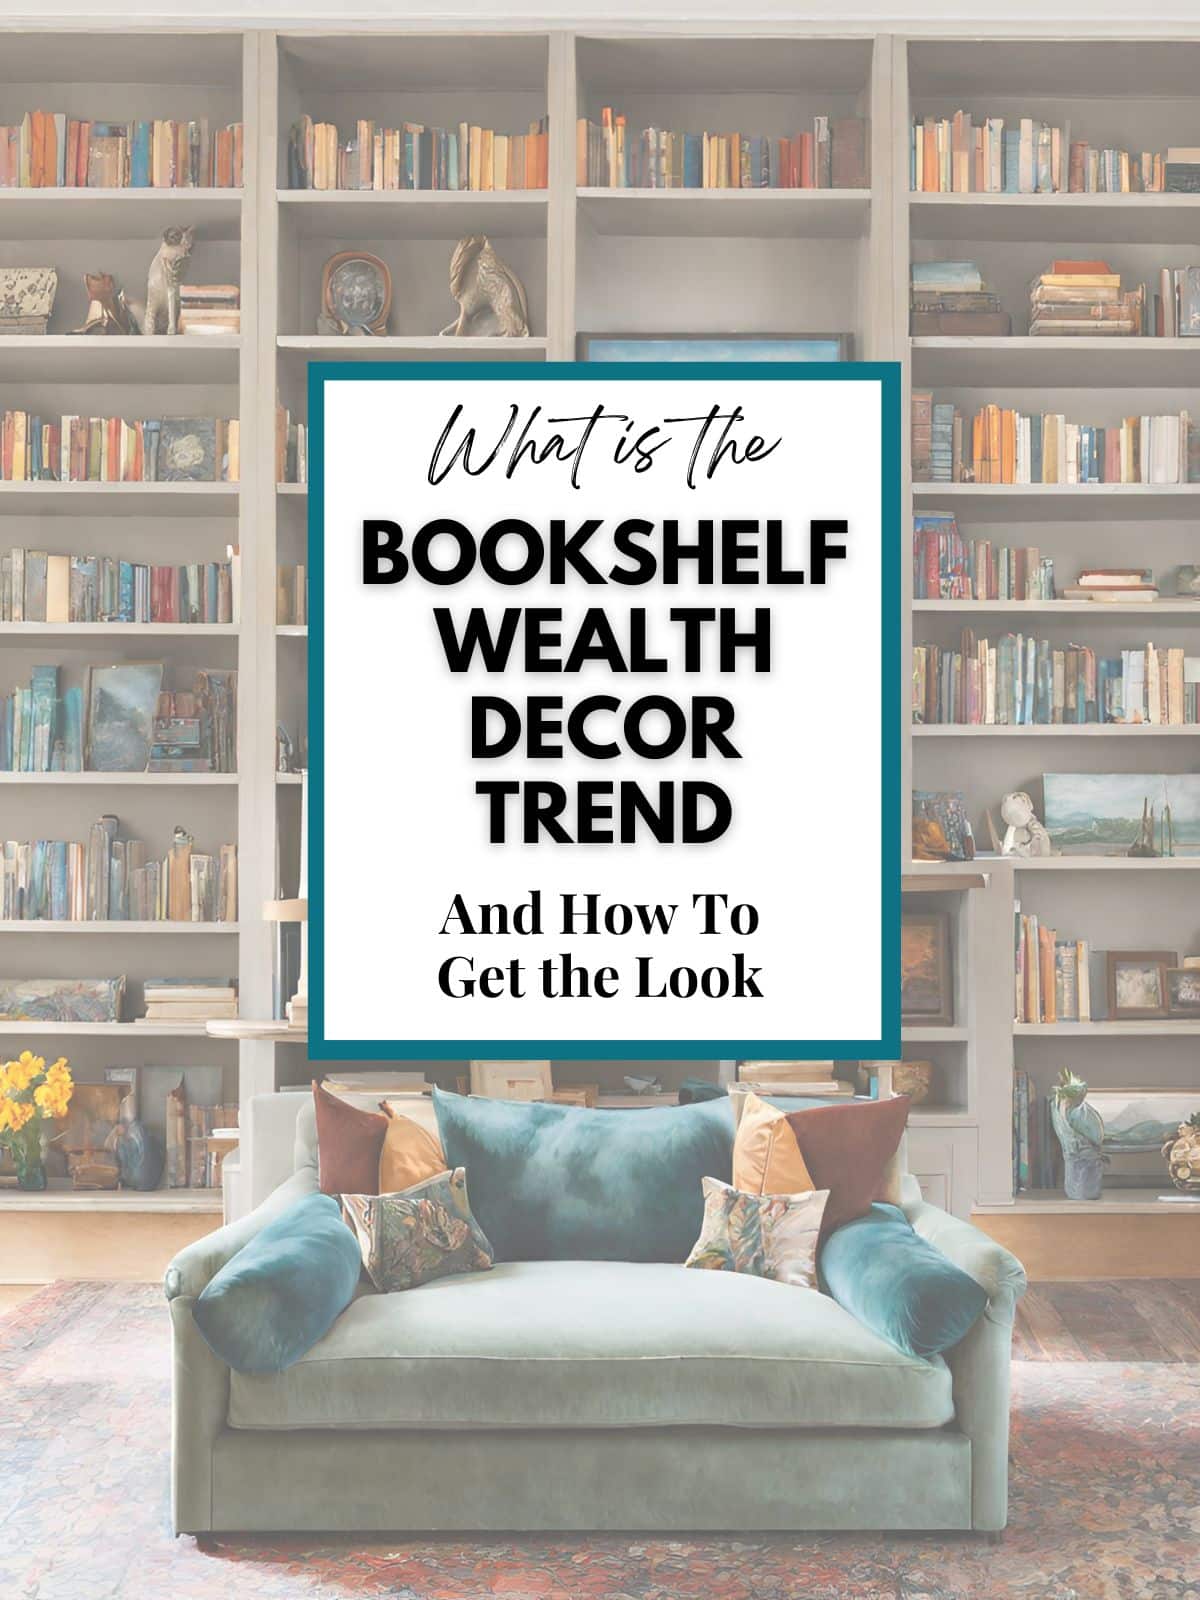 What Is the Bookshelf Wealth Decor Trend and How to Get the Look